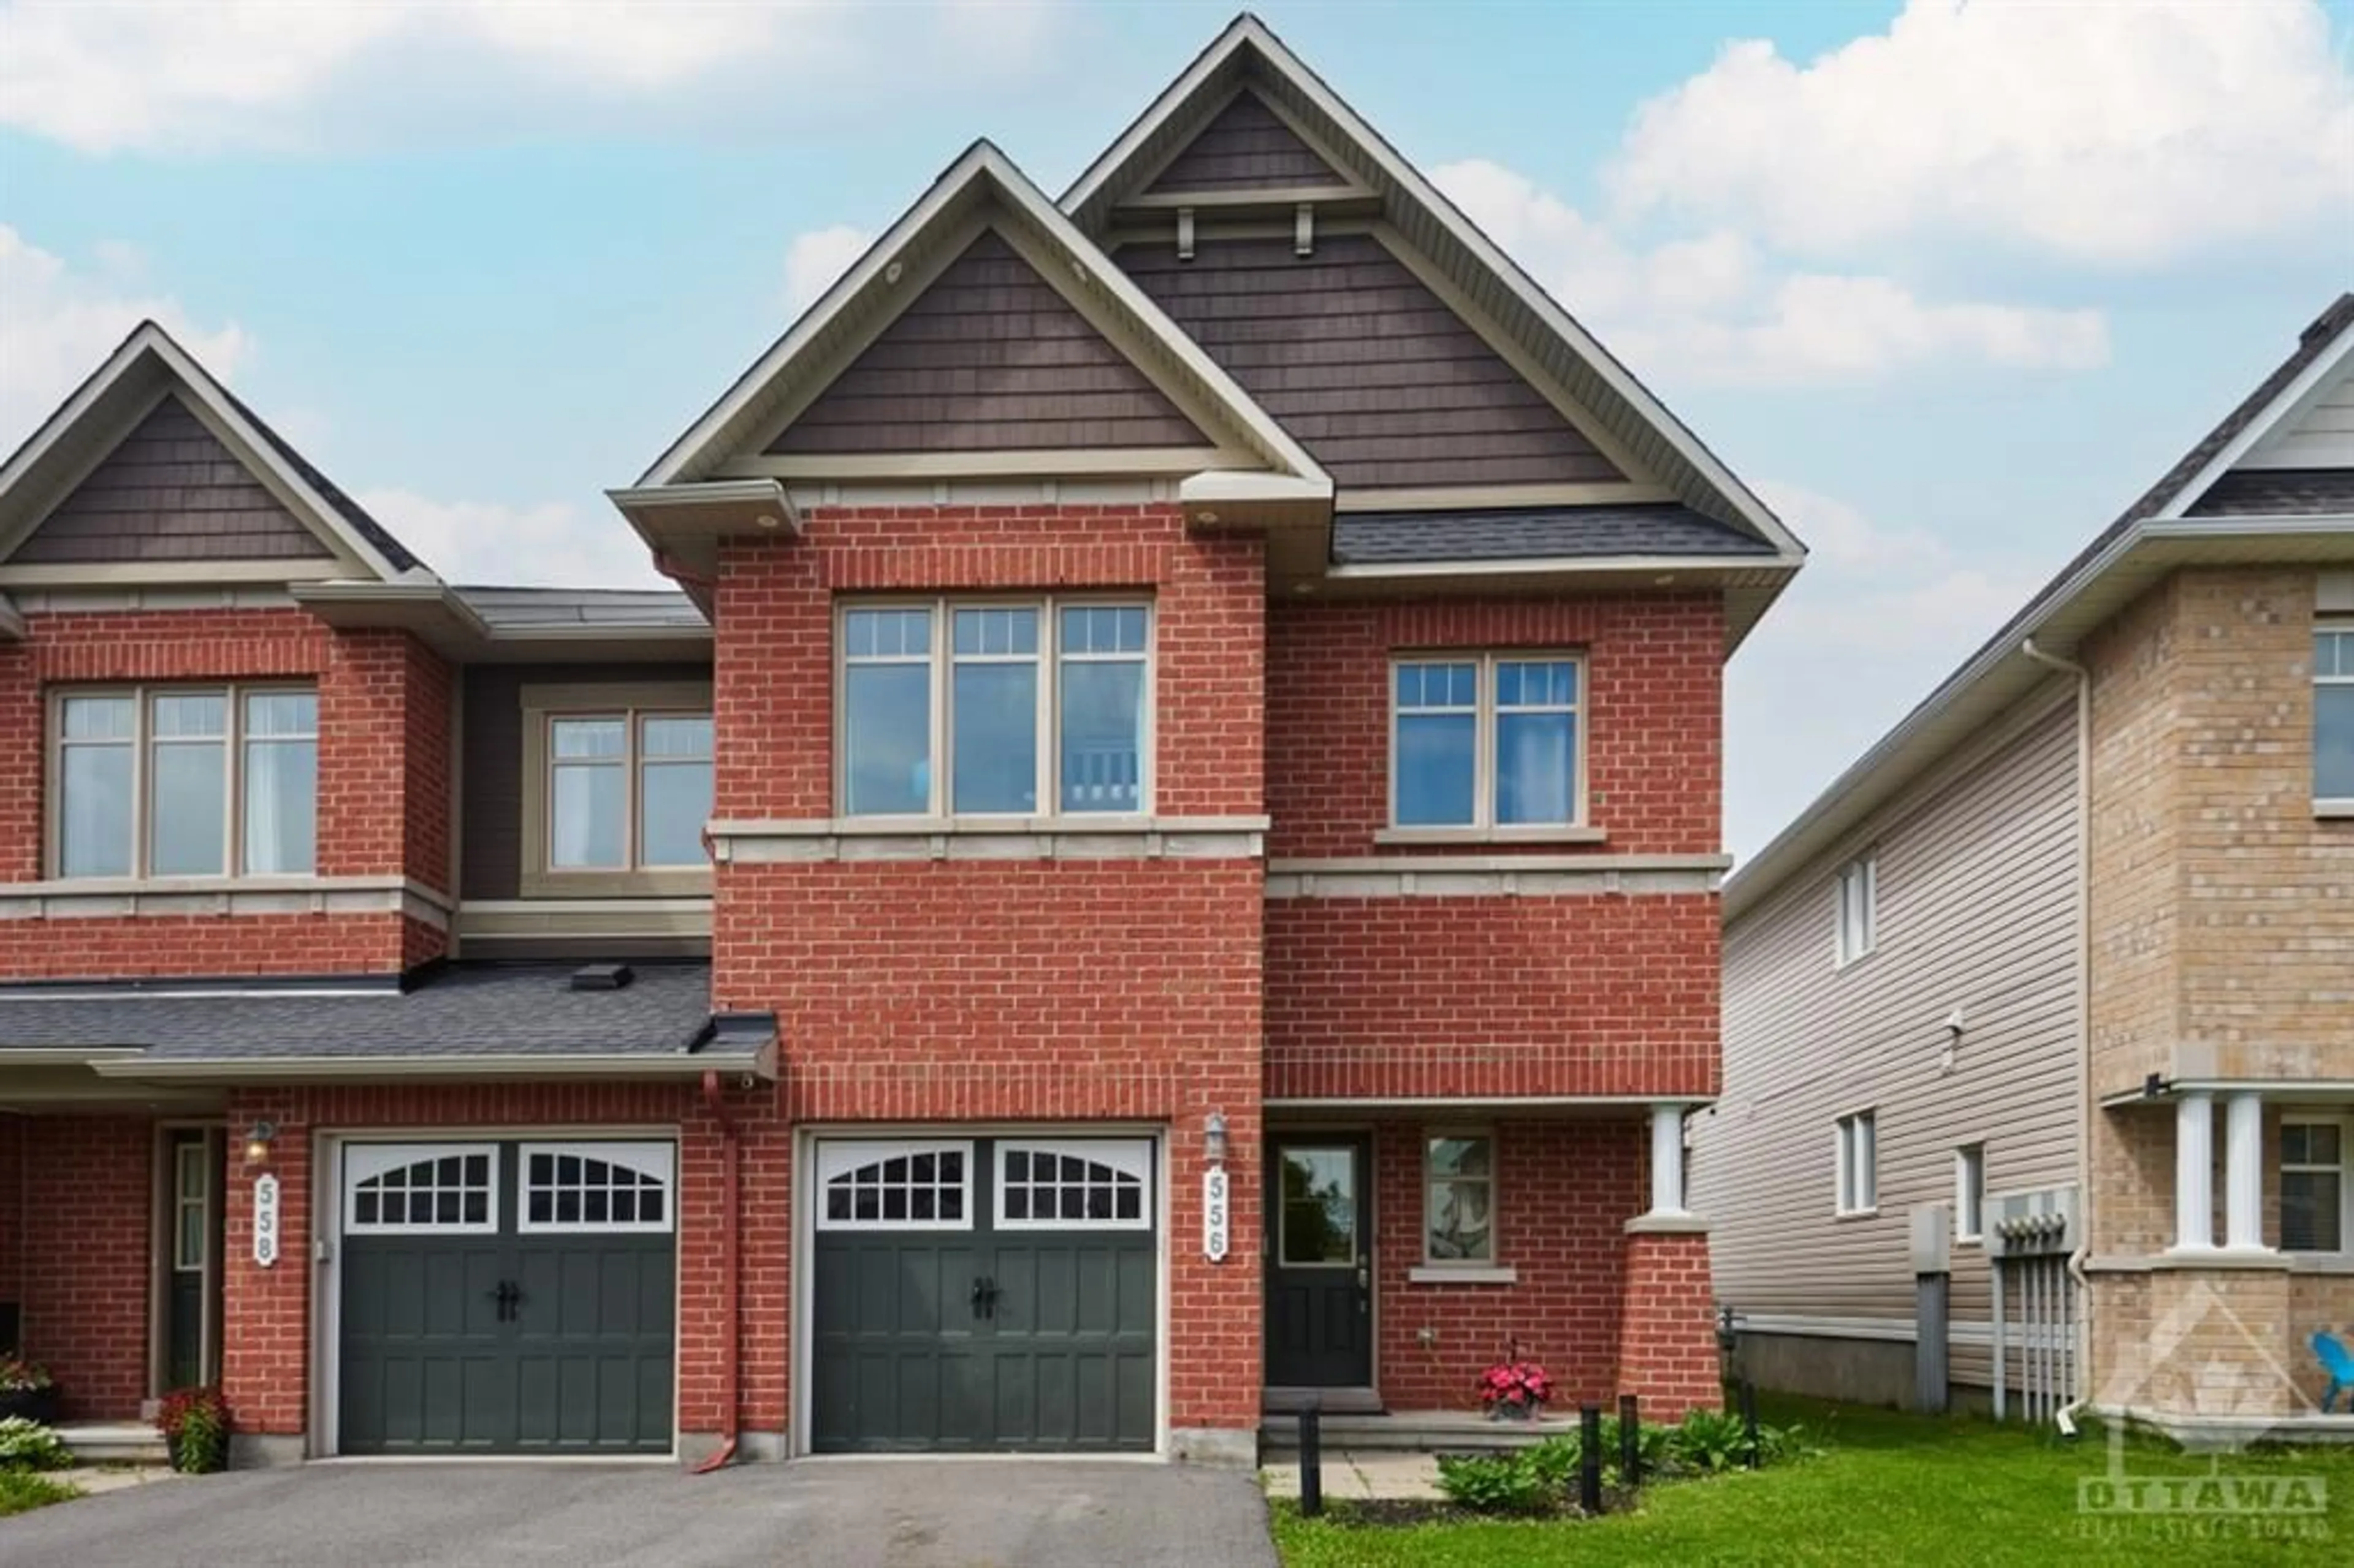 Home with brick exterior material for 556 LANGELIER Ave, Ottawa Ontario K1W 0E7